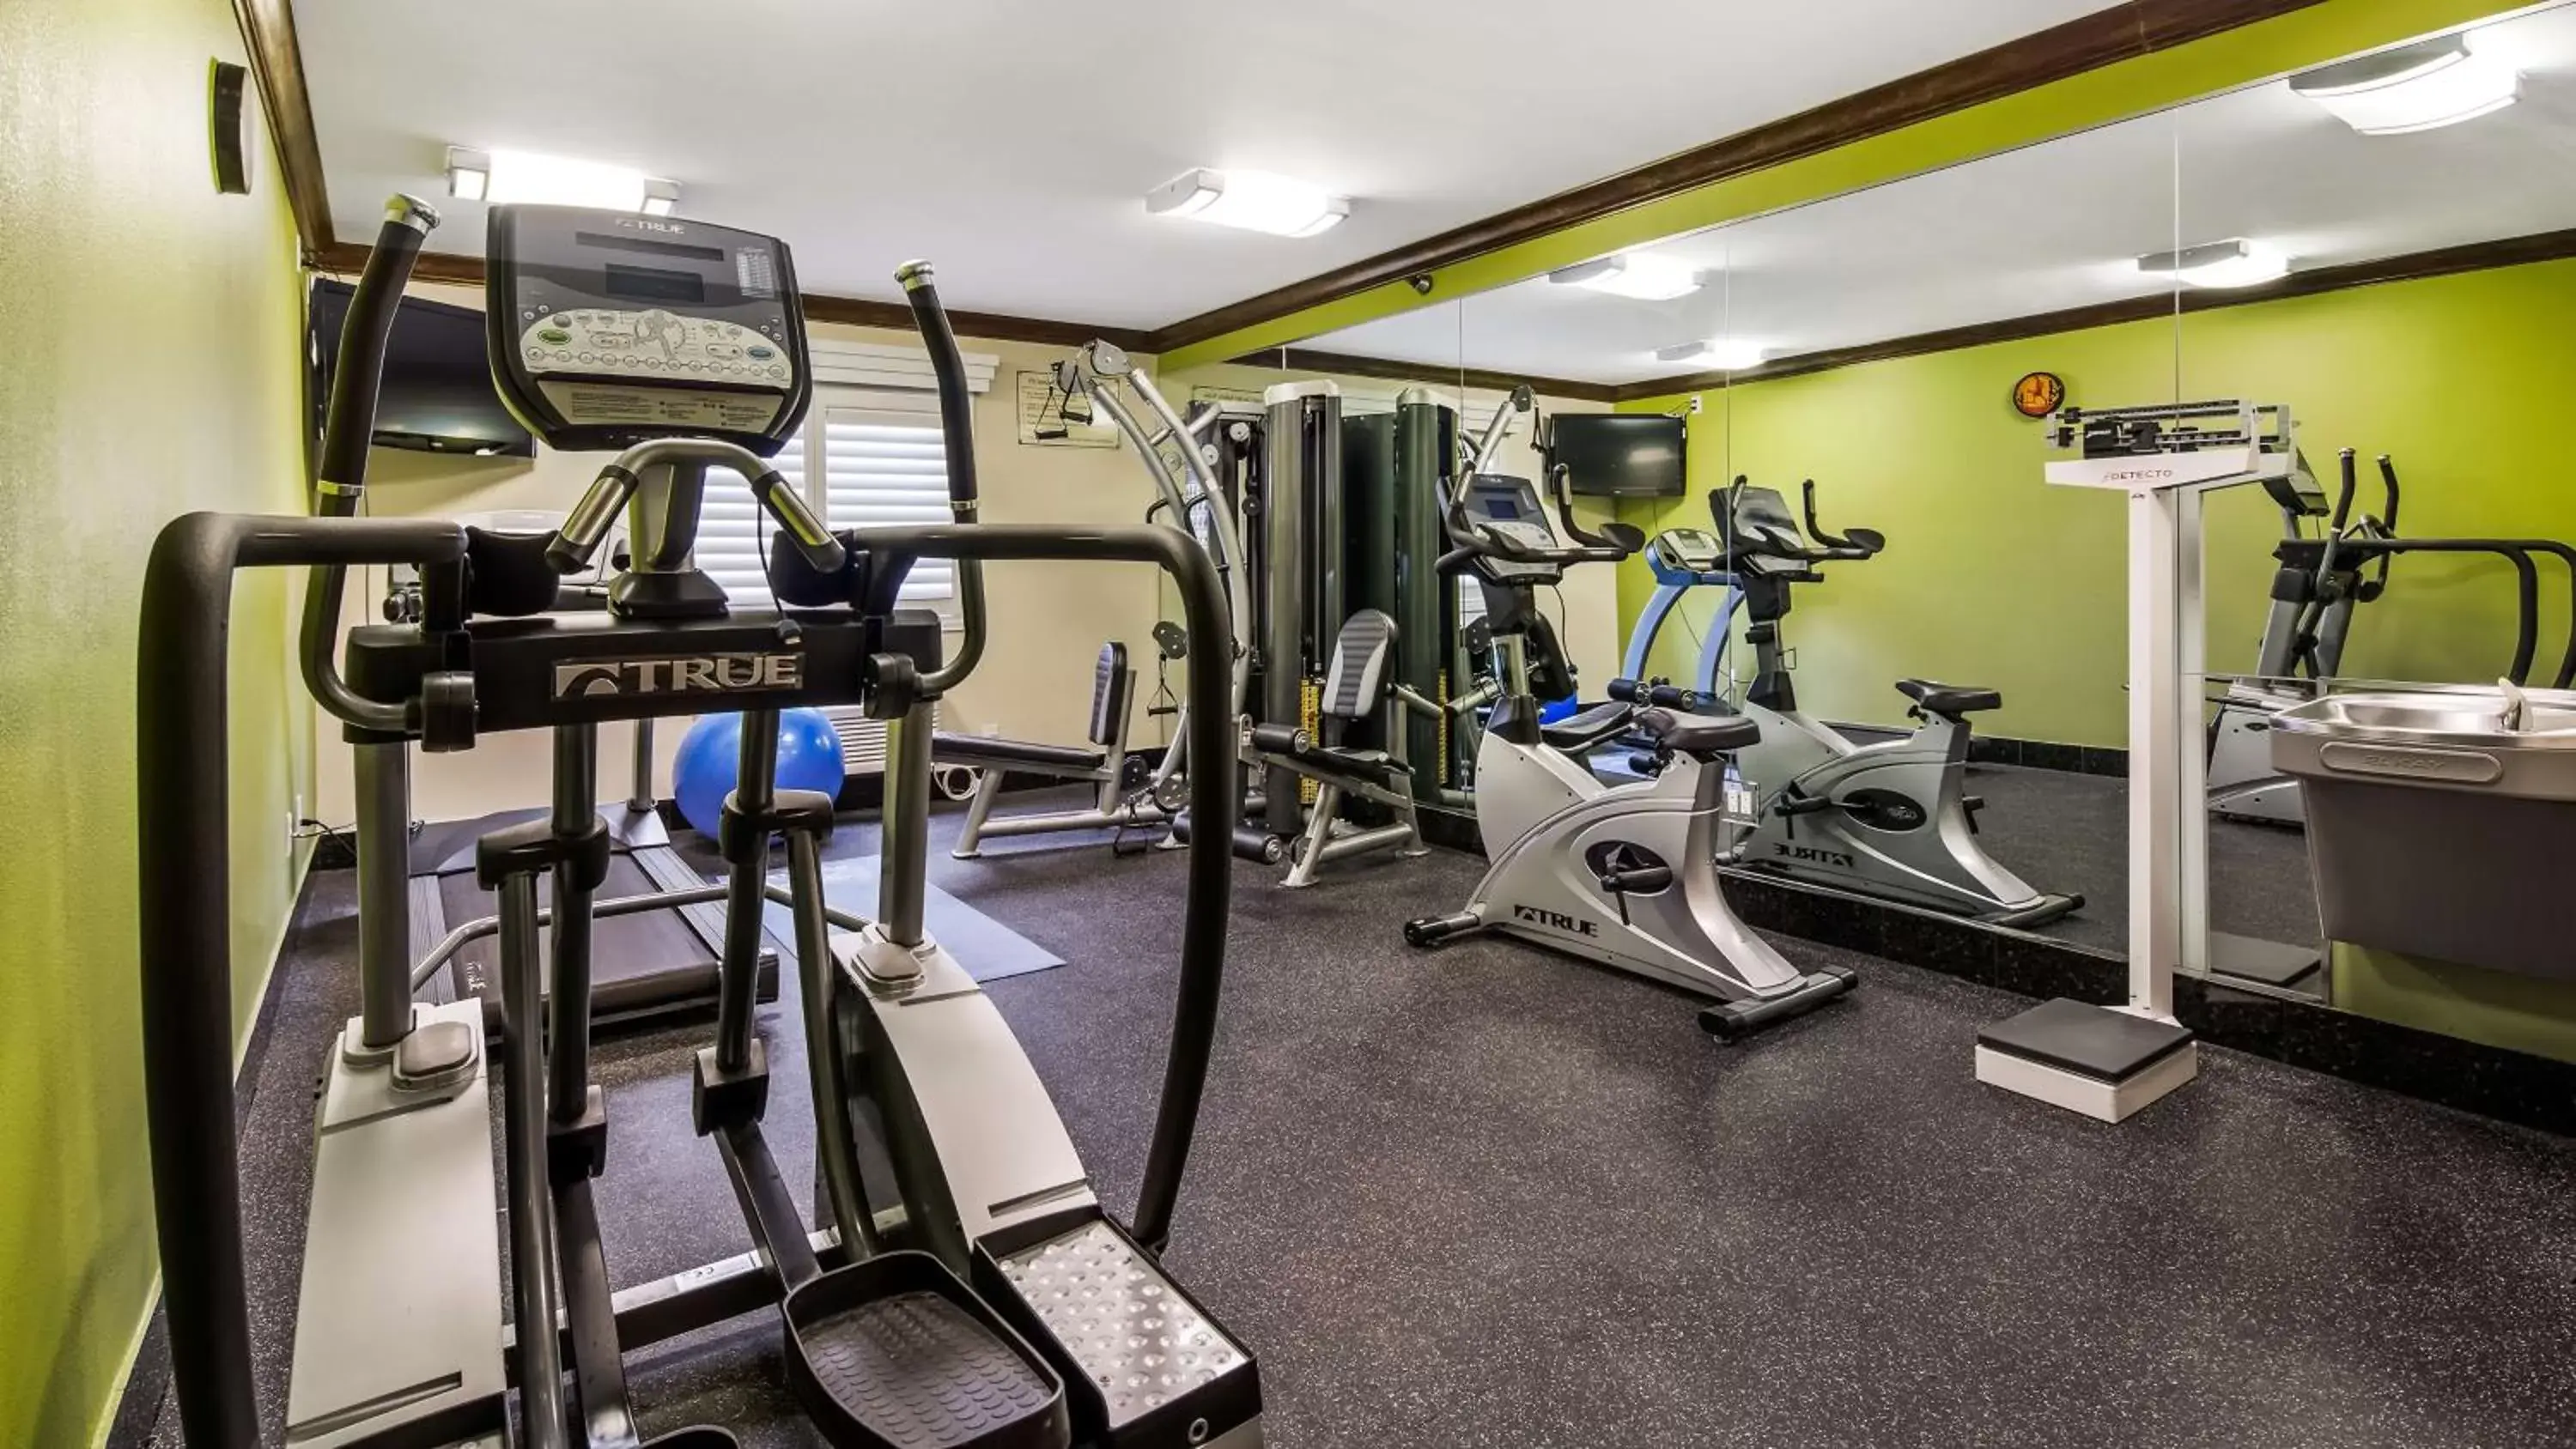 Fitness centre/facilities, Fitness Center/Facilities in Best Western Antelope Inn & Suites